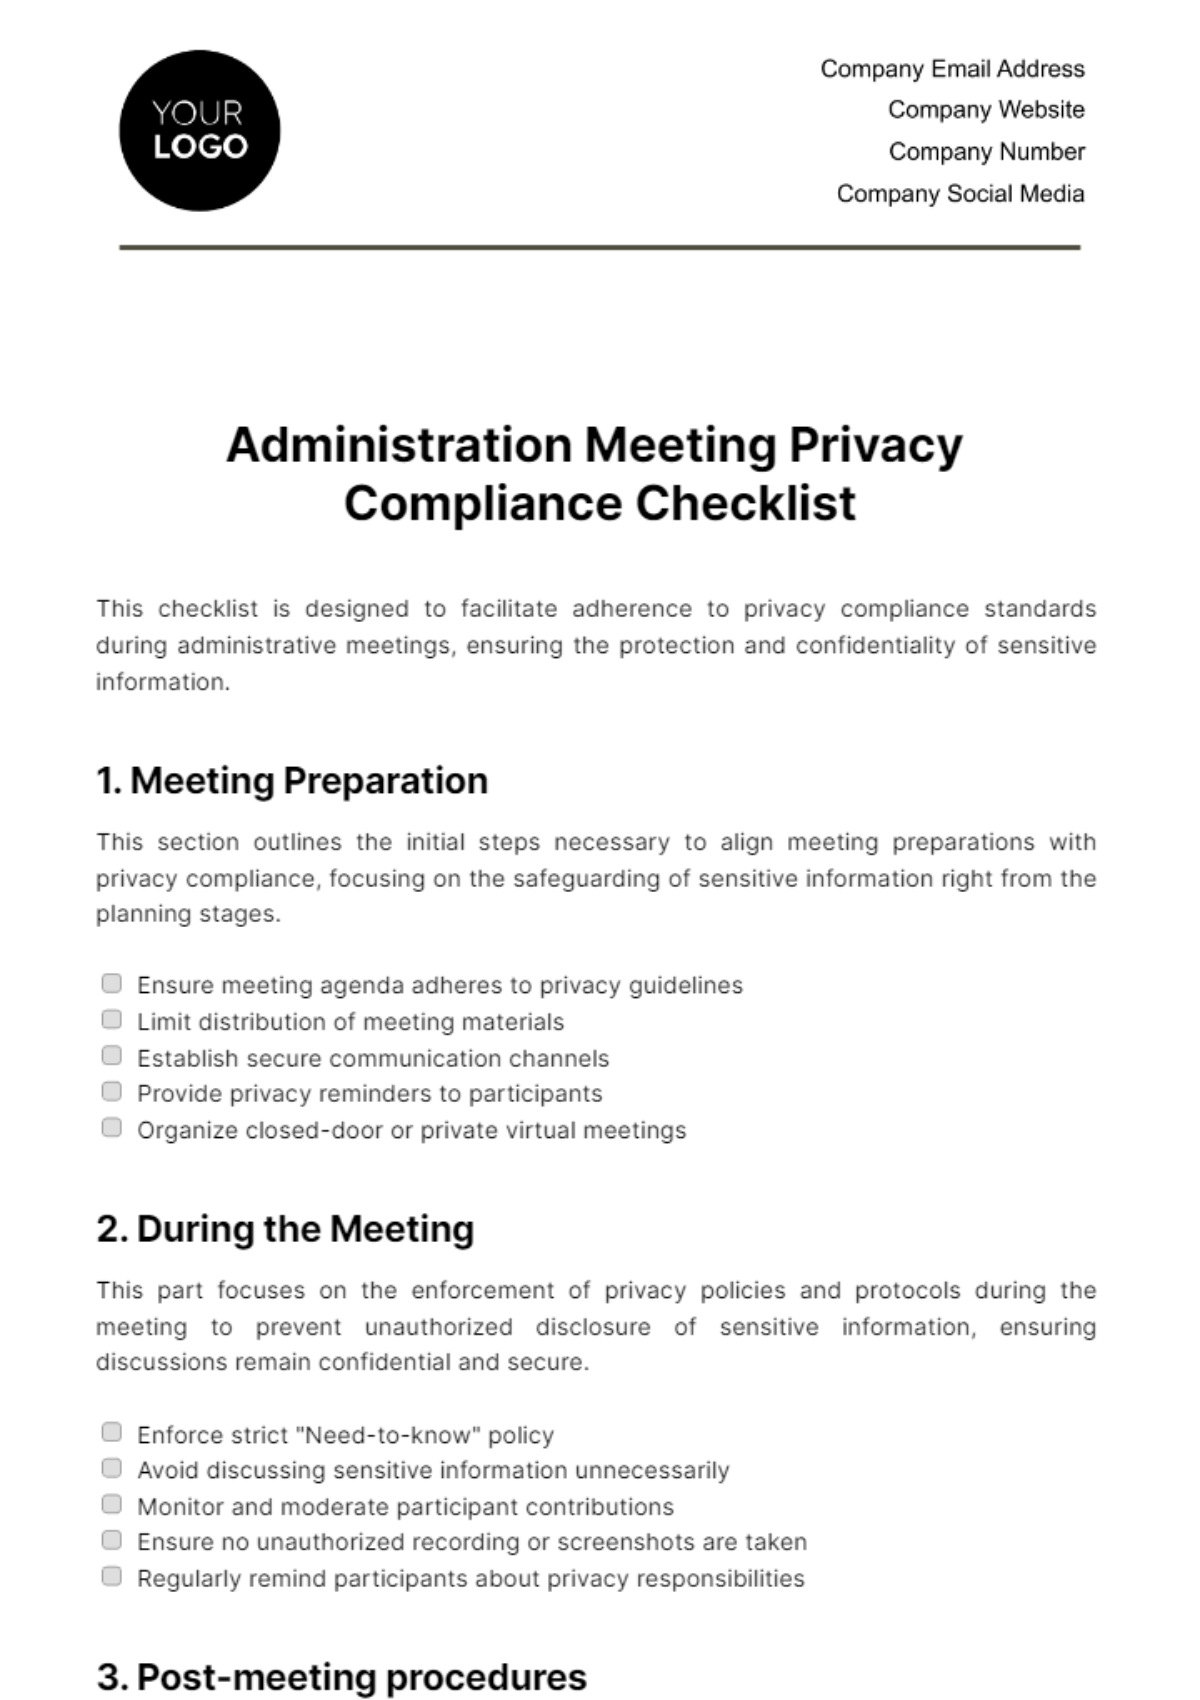 Free Administration Meeting Privacy Compliance Checklist Template